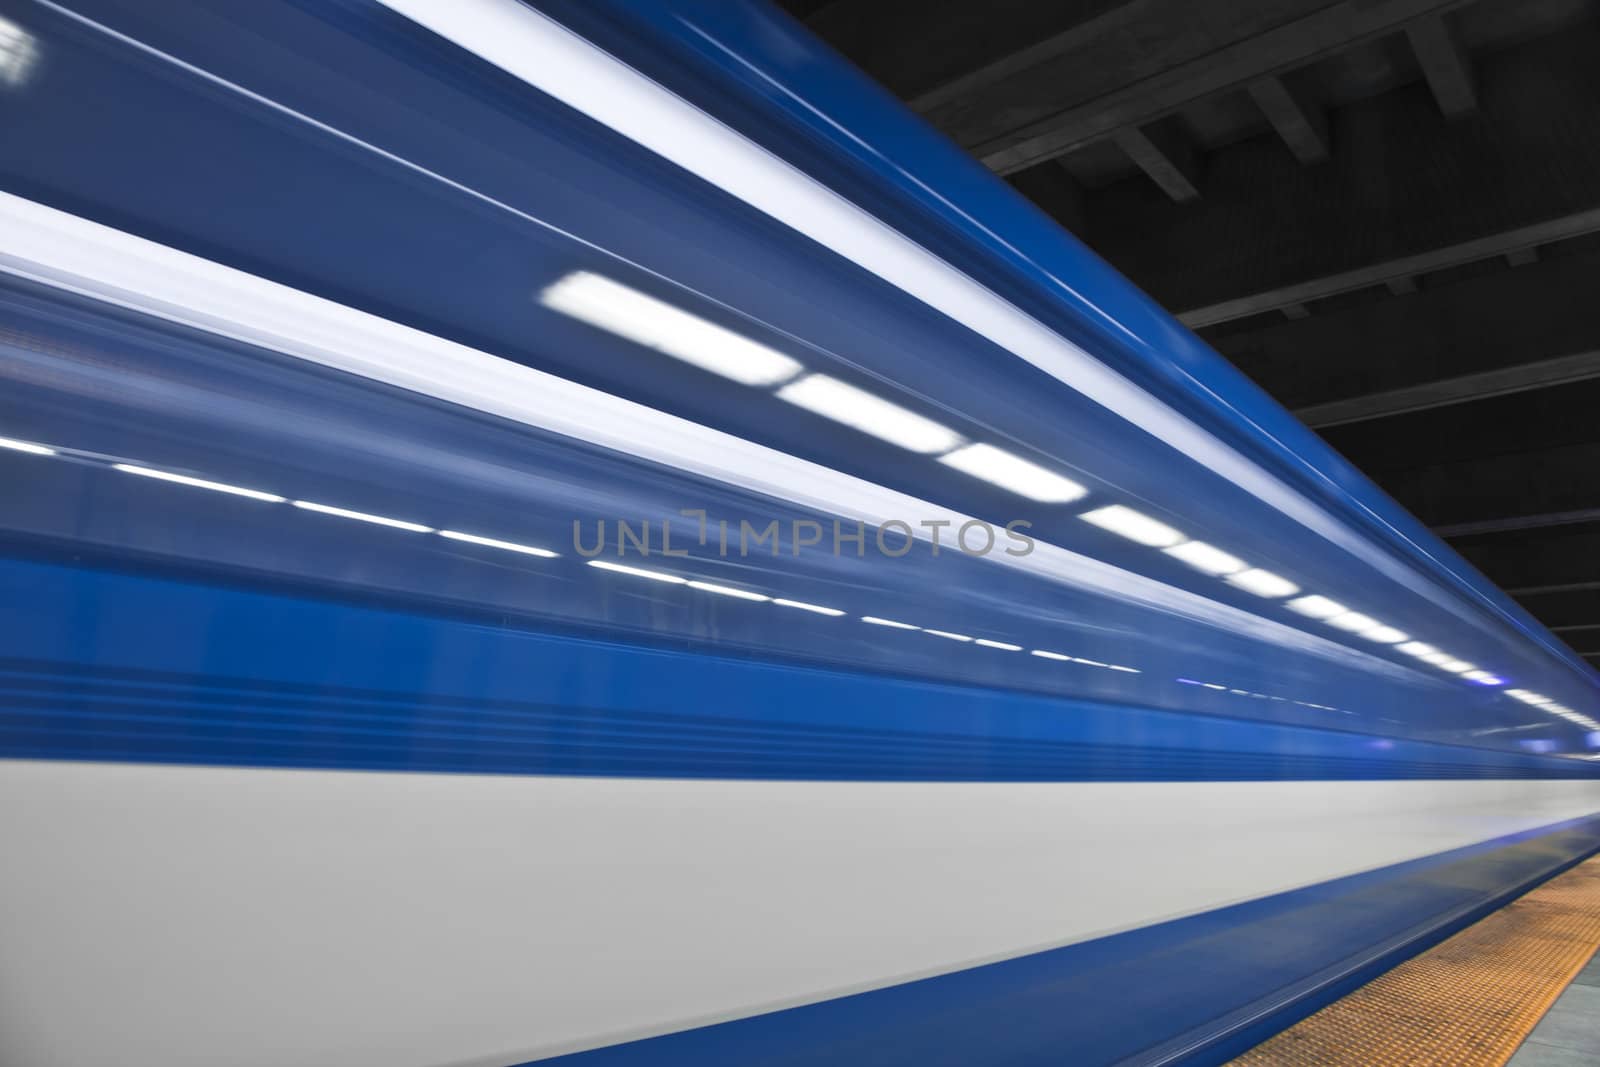 Just a close shot and almost abstract of a metro passing by. Long exposure and no people in the shot. This image create some nice white stripes !